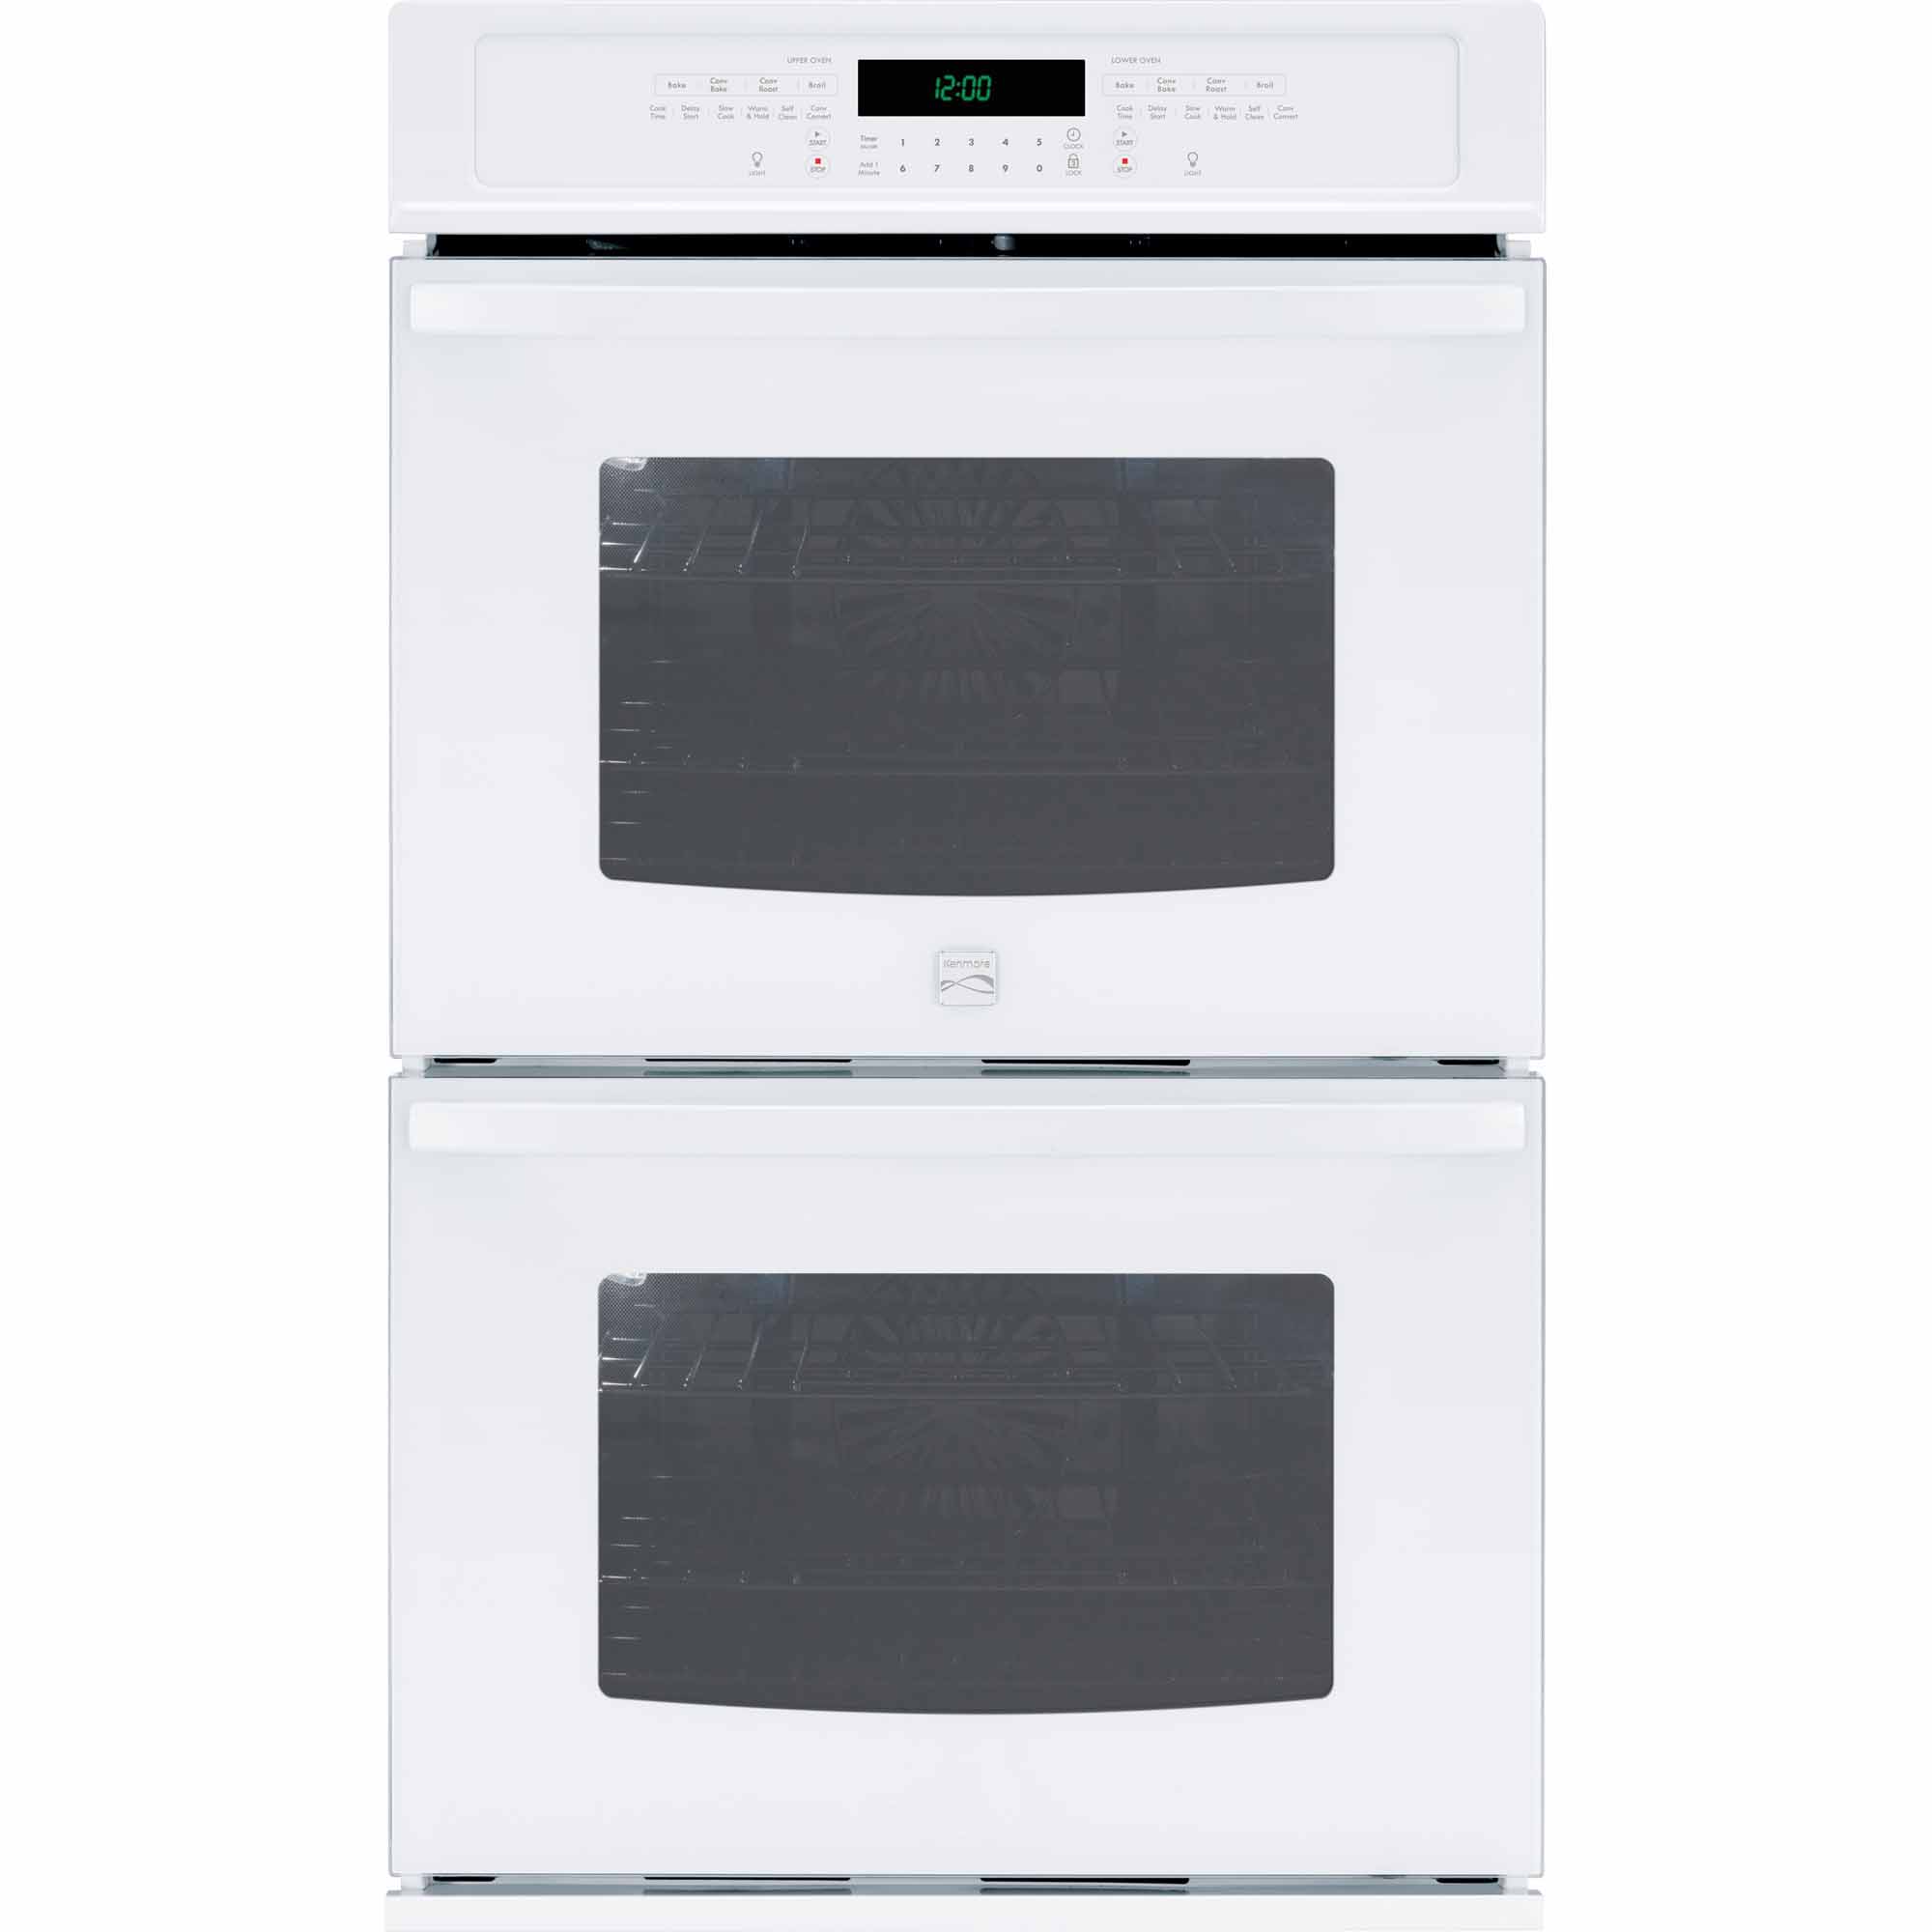 0012505800184 - 49532 30 SELF-CLEAN DOUBLE ELECTRIC WALL OVEN W/ CONVECTION - WHITE